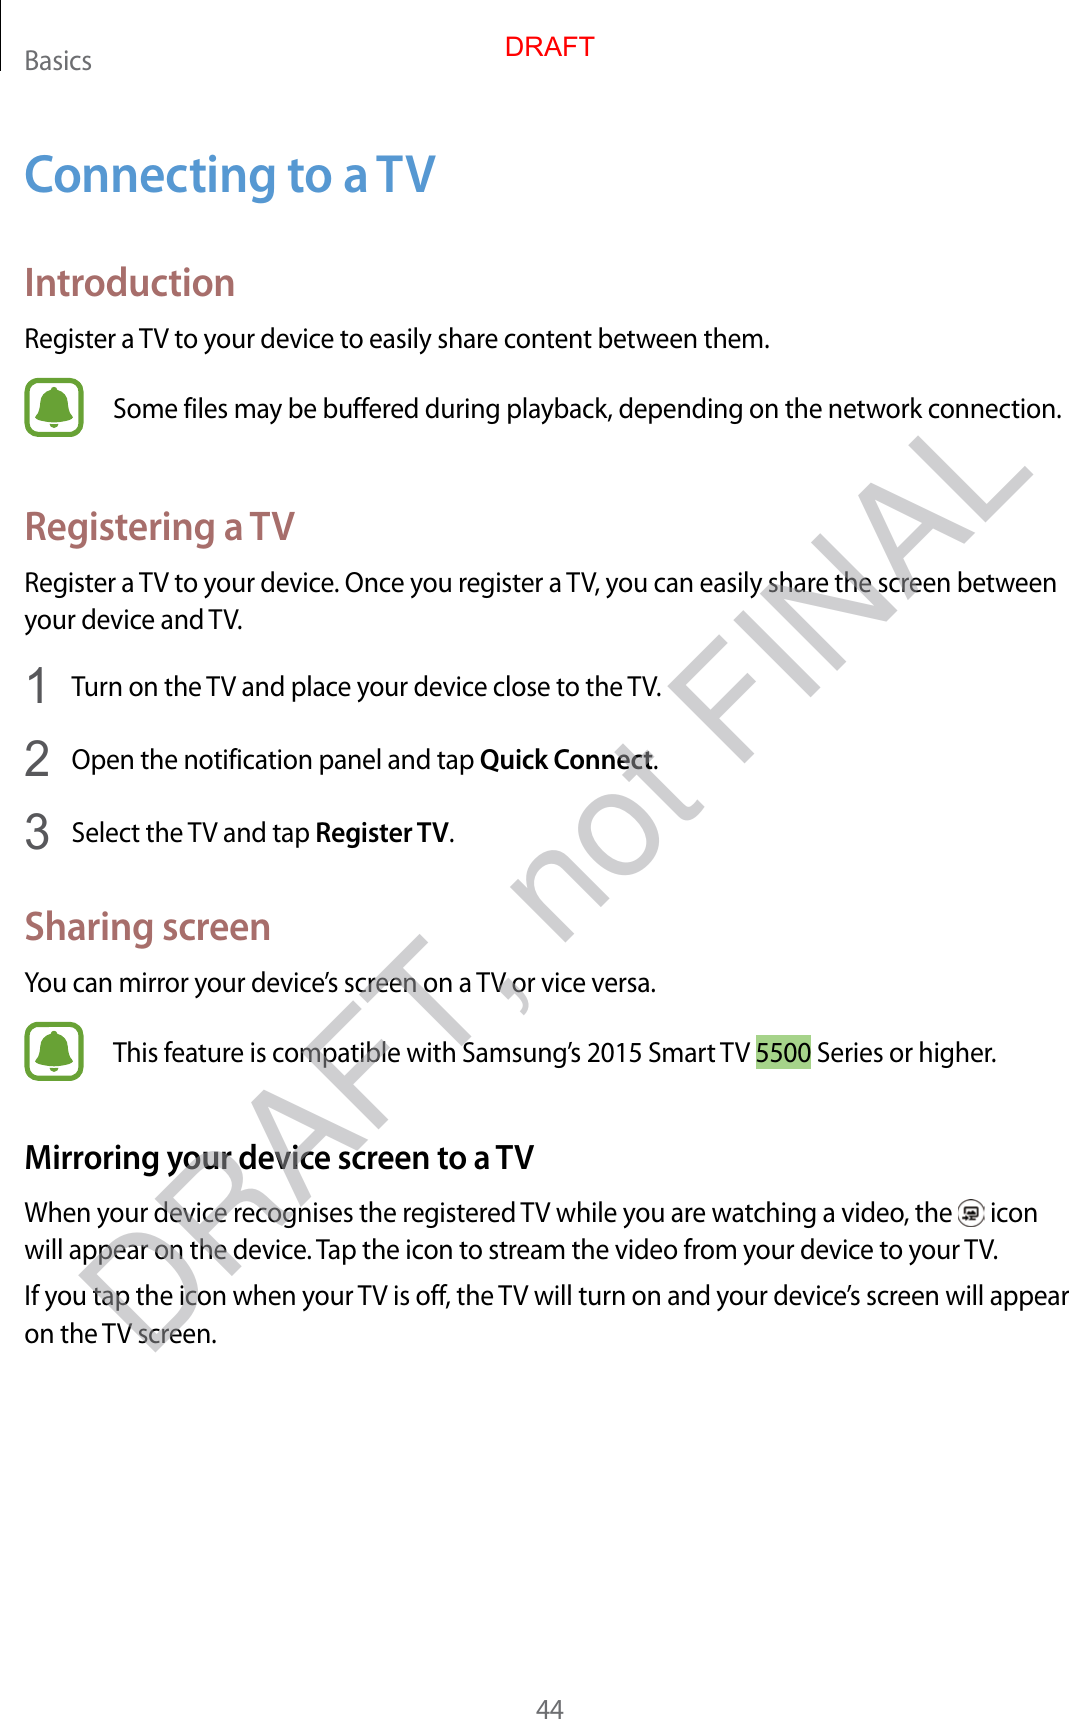 Basics44Connecting to a TVIntroductionRegister a TV to your device to easily share content between them.Some files may be buffered during playback, depending on the network connection.Registering a TVRegister a TV to your device. Once you register a TV, you can easily share the screen between your device and TV.1  Turn on the TV and place your device close to the TV.2  Open the notification panel and tap Quick Connect.3  Select the TV and tap Register TV.Sharing screenYou can mirror your device’s screen on a TV or vice versa.This feature is compatible with Samsung’s 2015 Smart TV 5500 Series or higher.Mirroring your device screen to a TVWhen your device recognises the registered TV while you are watching a video, the   icon will appear on the device. Tap the icon to stream the video from your device to your TV.If you tap the icon when your TV is off, the TV will turn on and your device’s screen will appear on the TV screen.DRAFTDRAFT, not FINAL